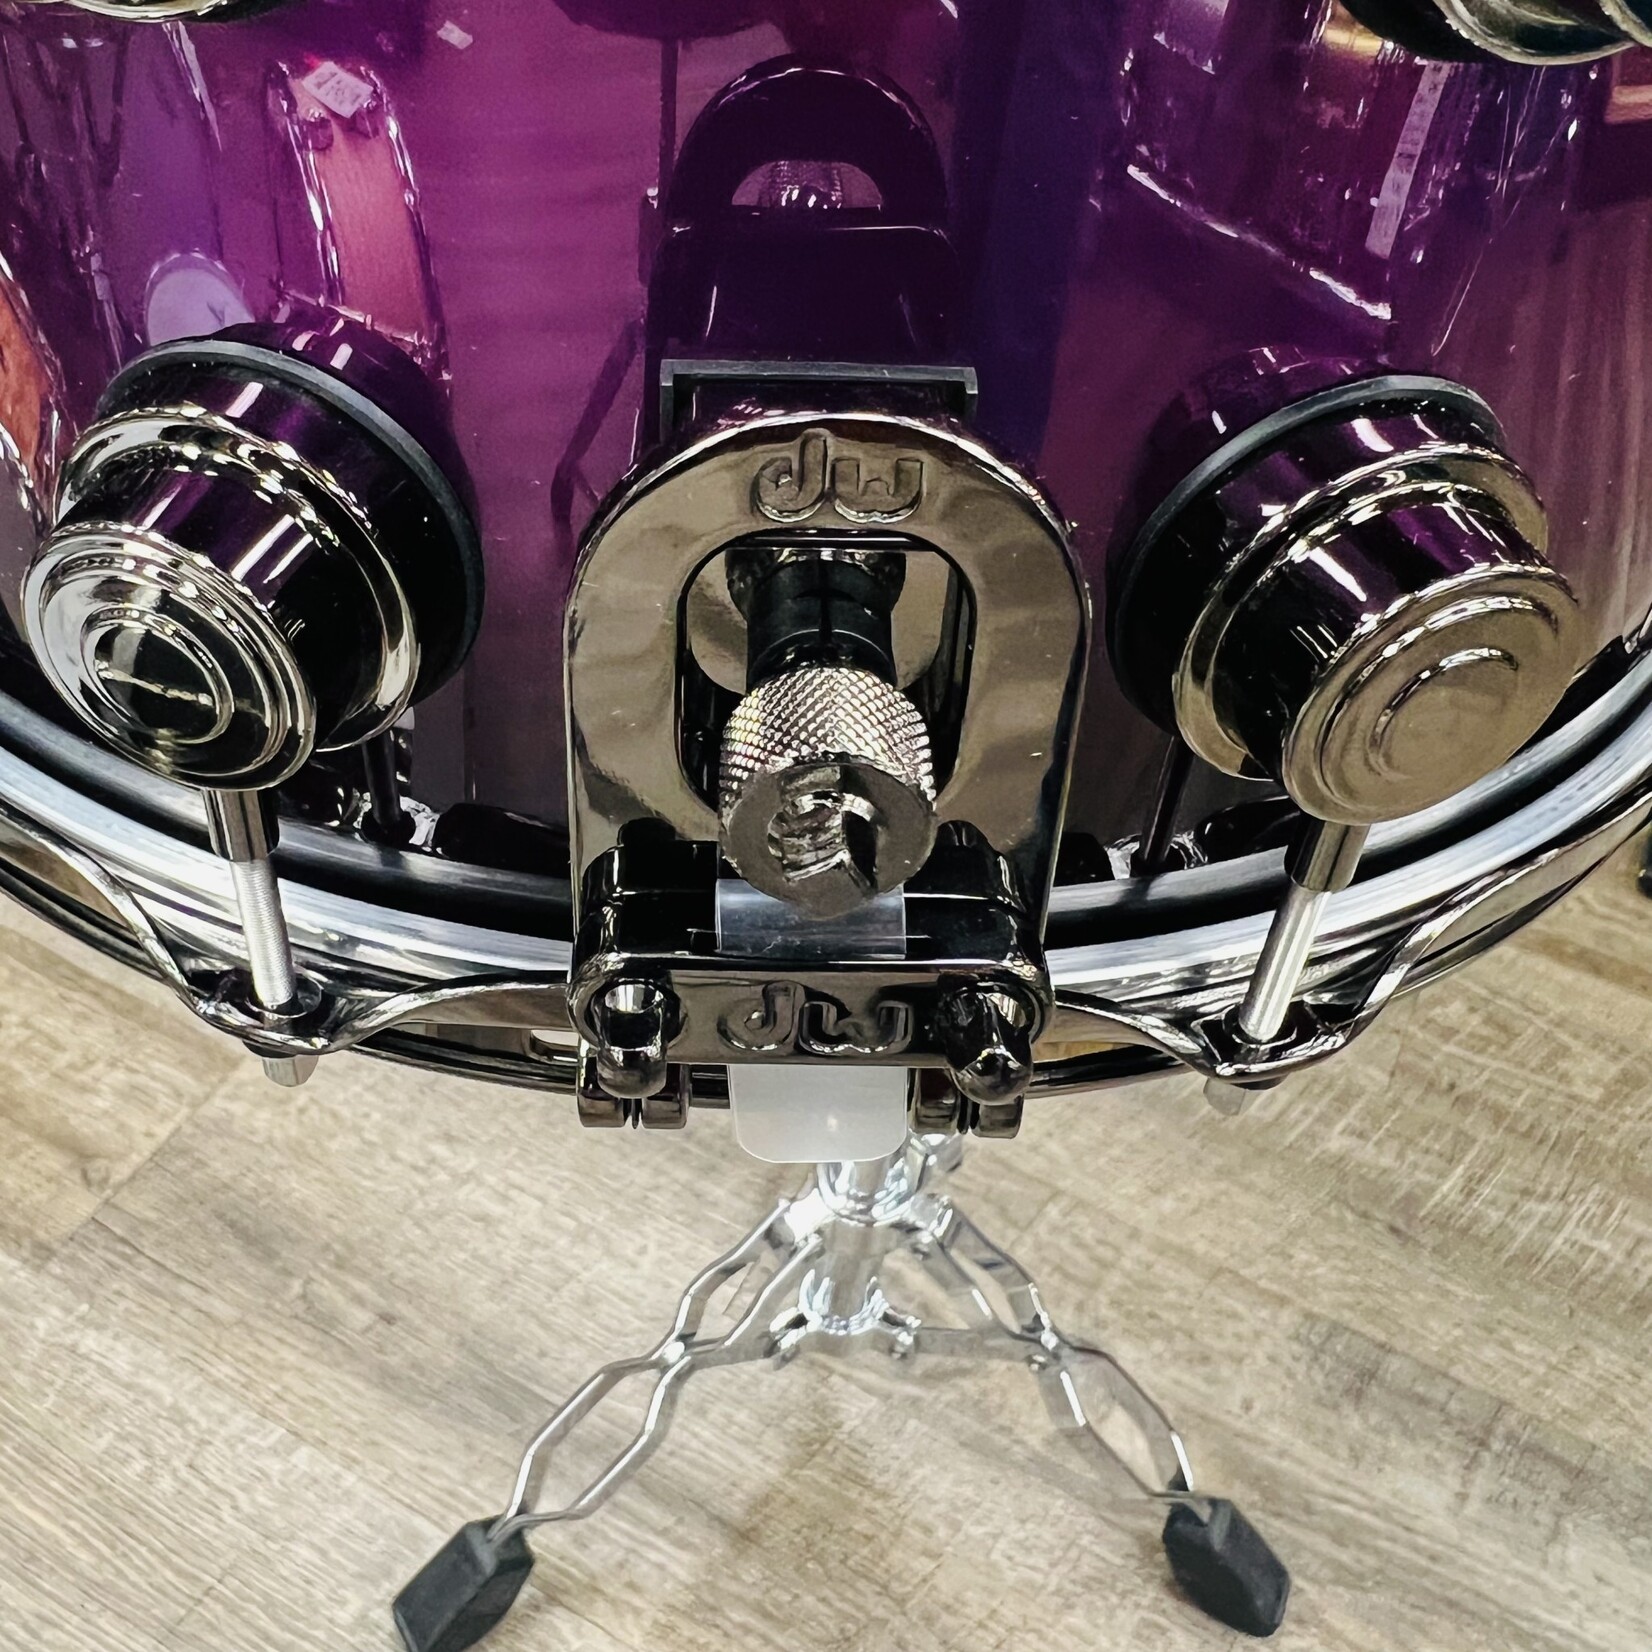 DW DW Collector's SSC Maple Exotic 8x14" (Purple Anodized to Black Burst w/ Black Nickel Hardware)